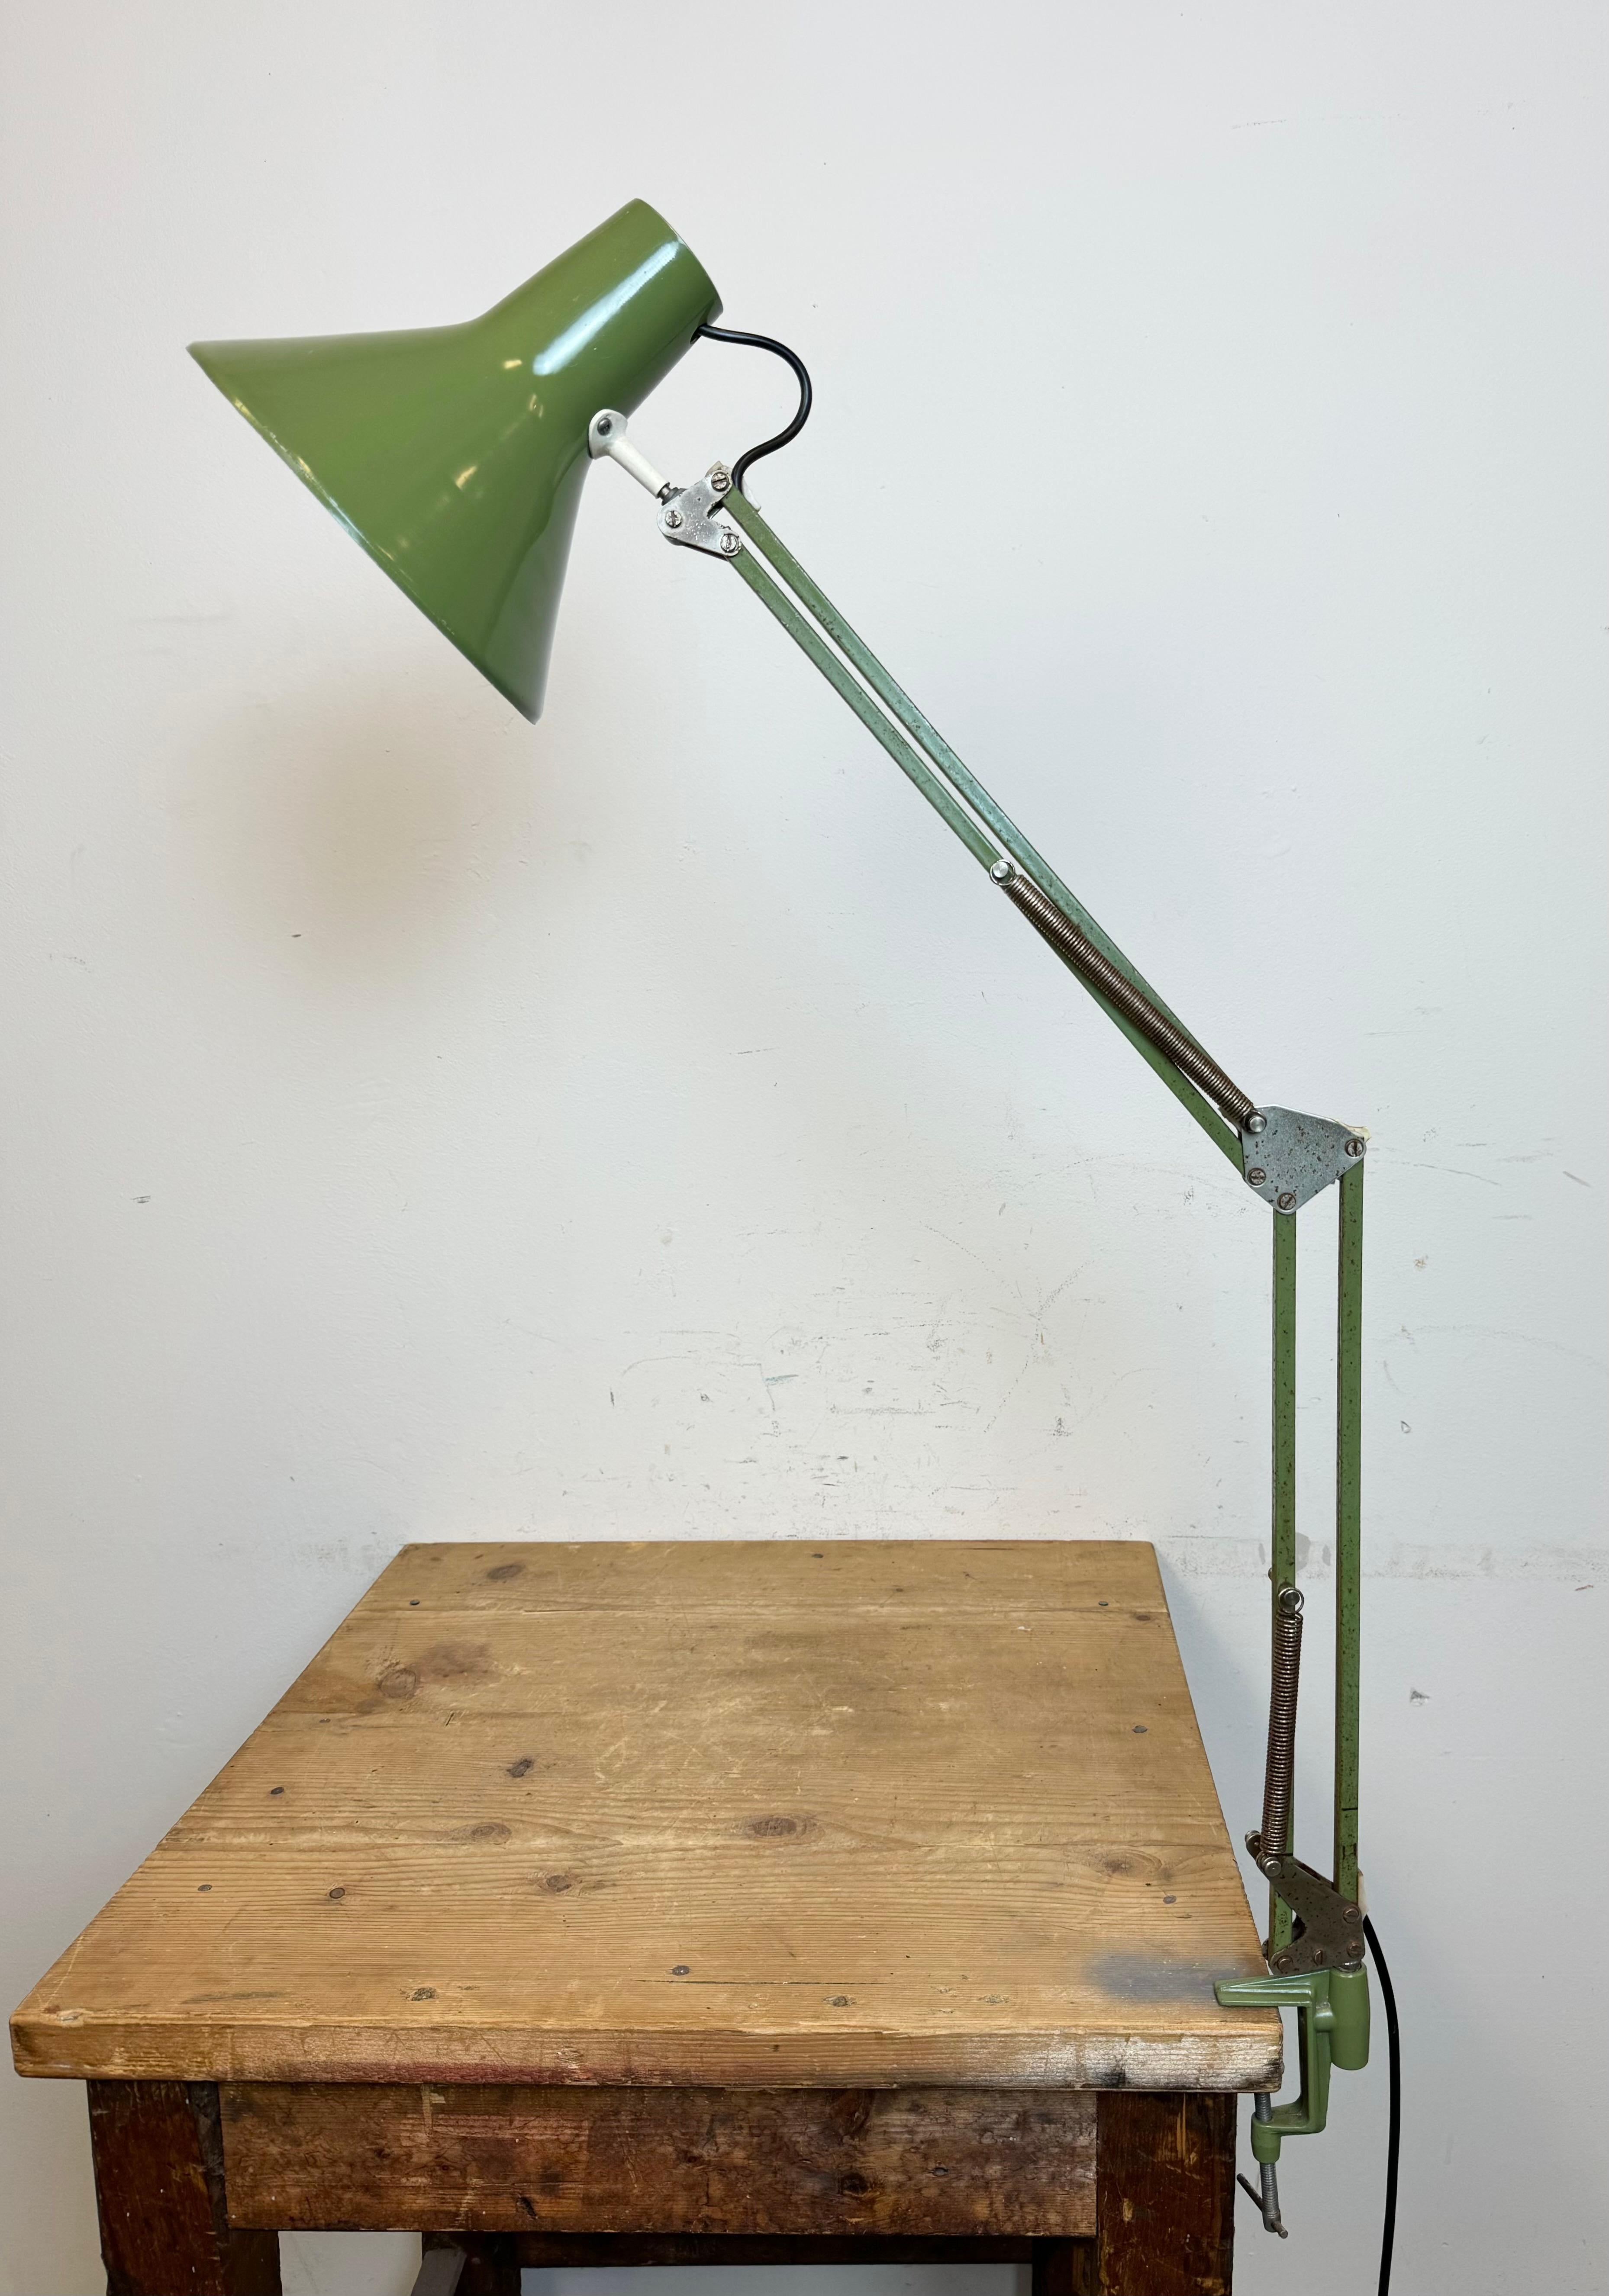 Vintage green adjustable table lamp made in Italy during the 1970. Adjustable in all desired positions. It features an aluminium shade and an iron arm with clamp base. The socket requires standard E 27/ E 26 light bulbs. The diameter of the shade is